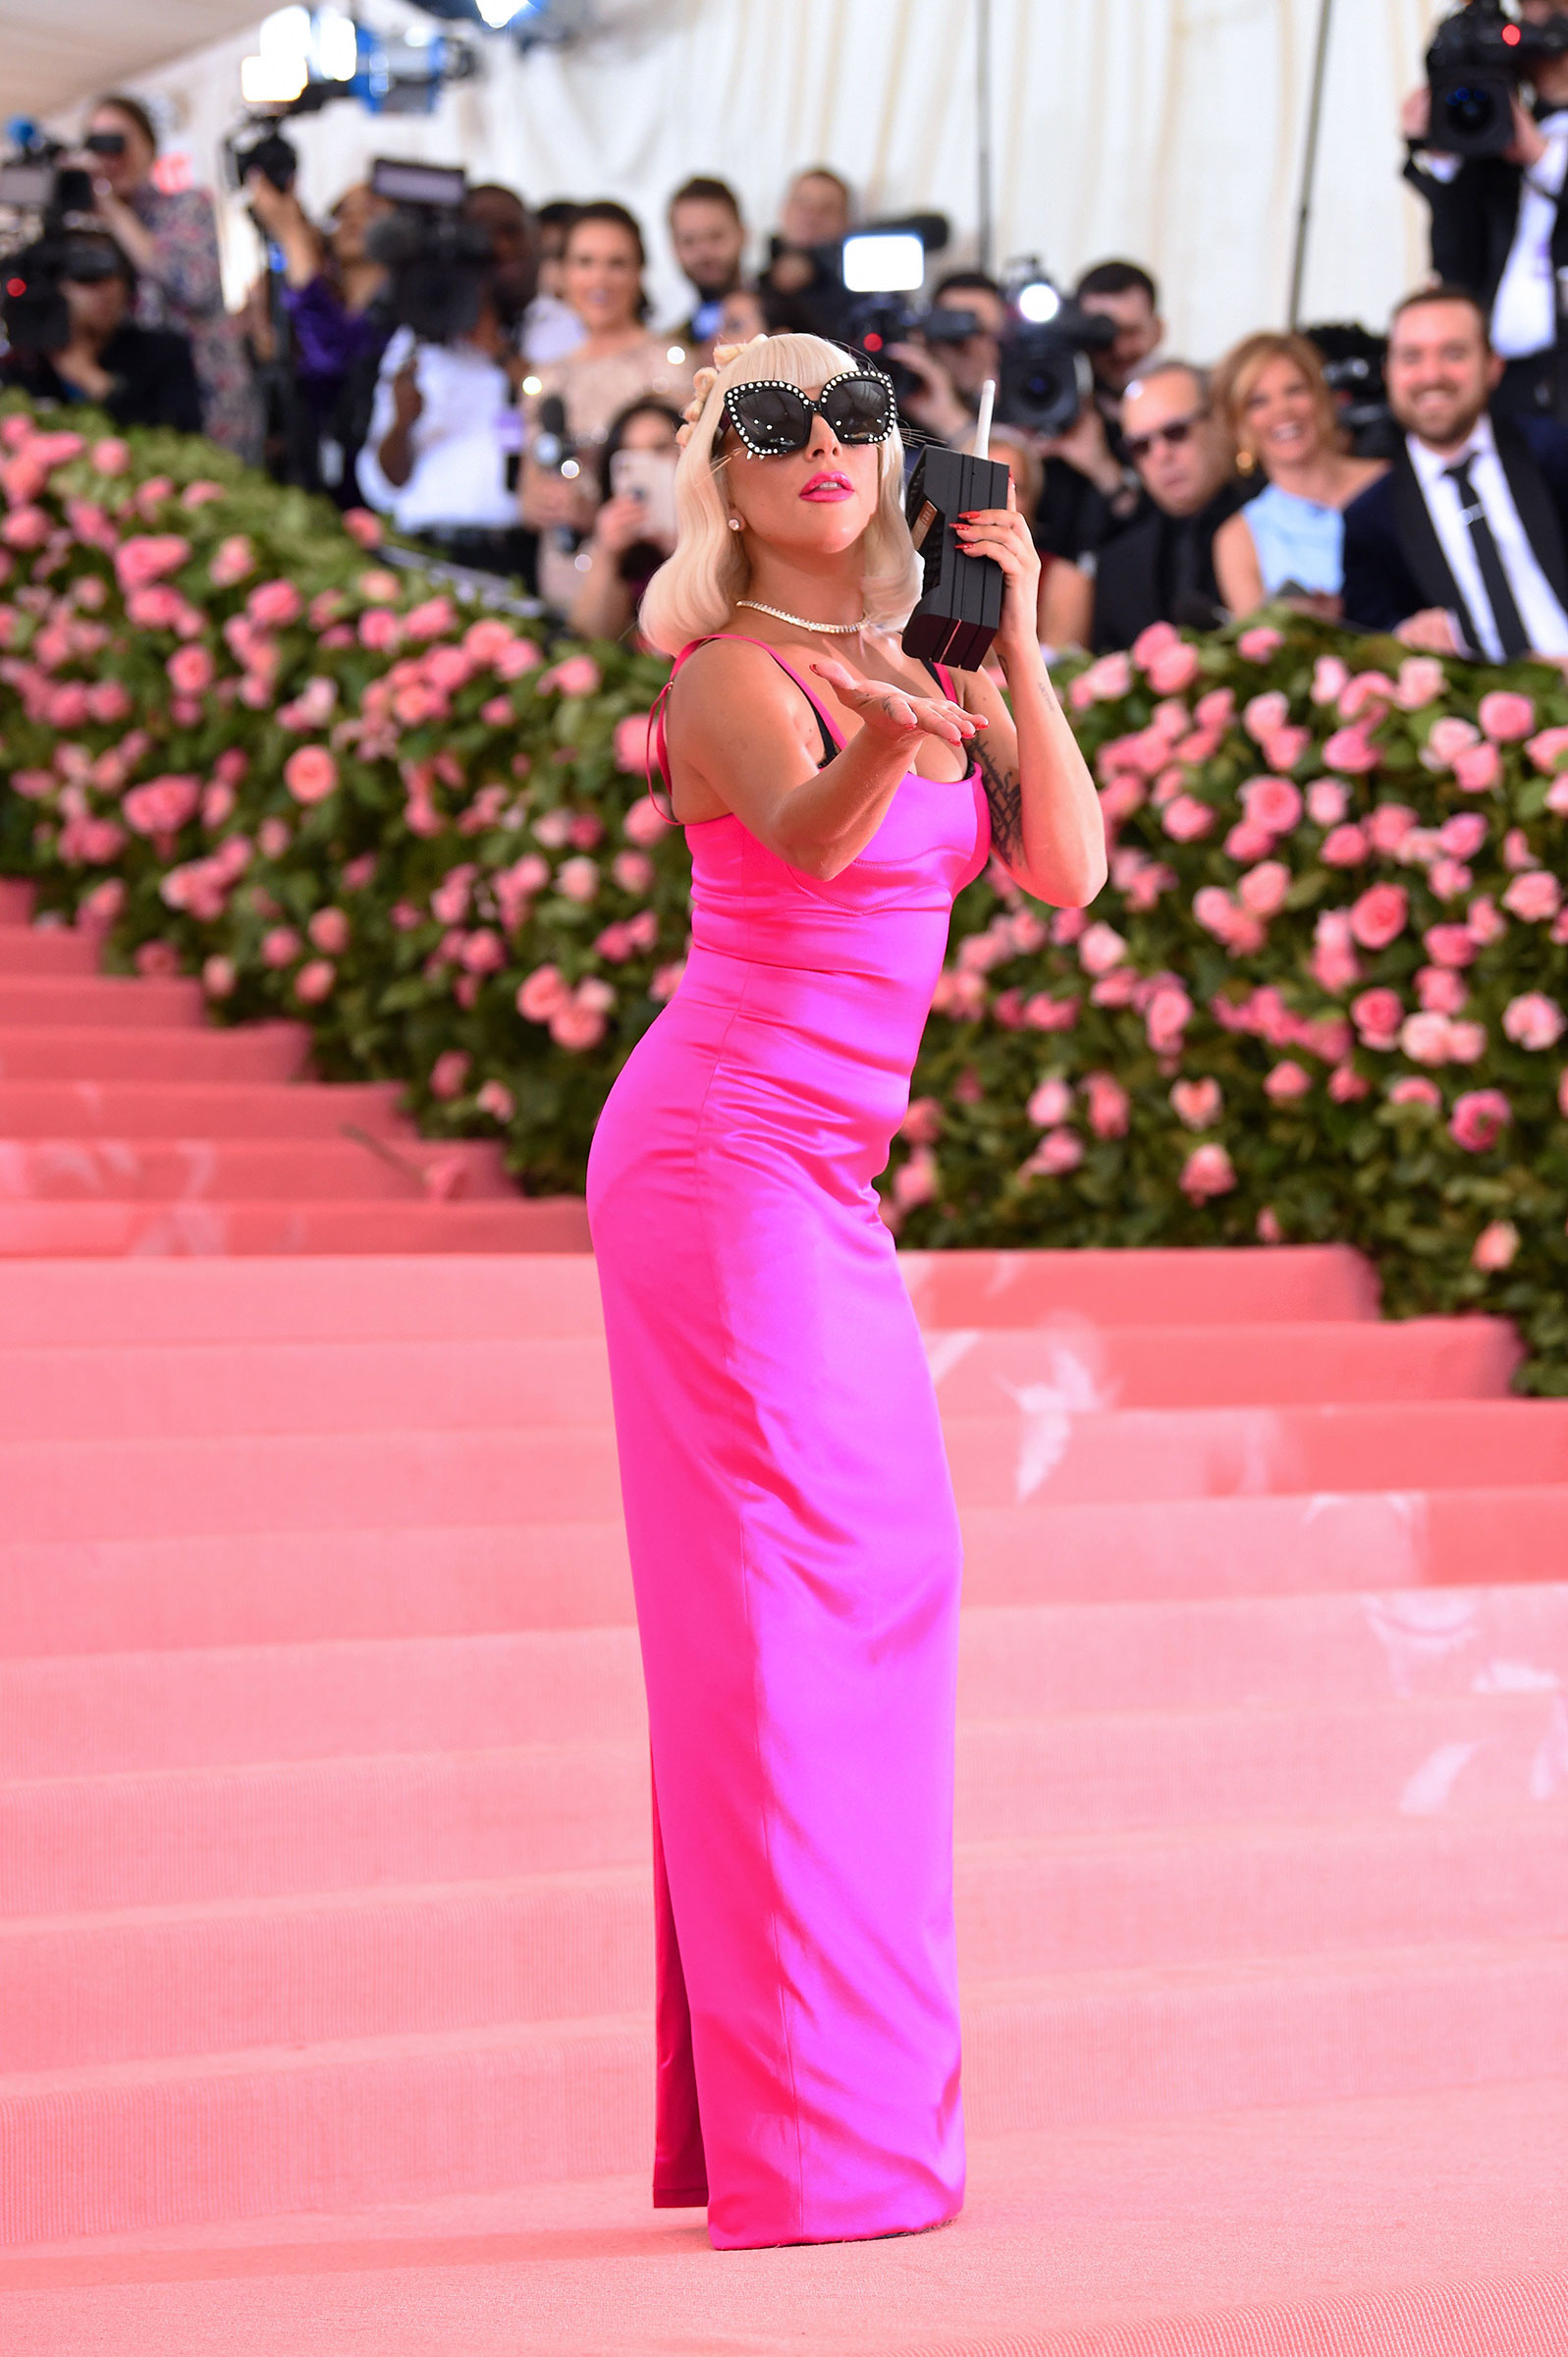 Lady Gaga attends The 2019 Met Gala Celebrating Camp: Notes on Fashion at Metropolitan Museum of Art in New York City on May 06, 2019. (Dimitrios Kambouris—The Met Museum/Vogue/Getty Images)